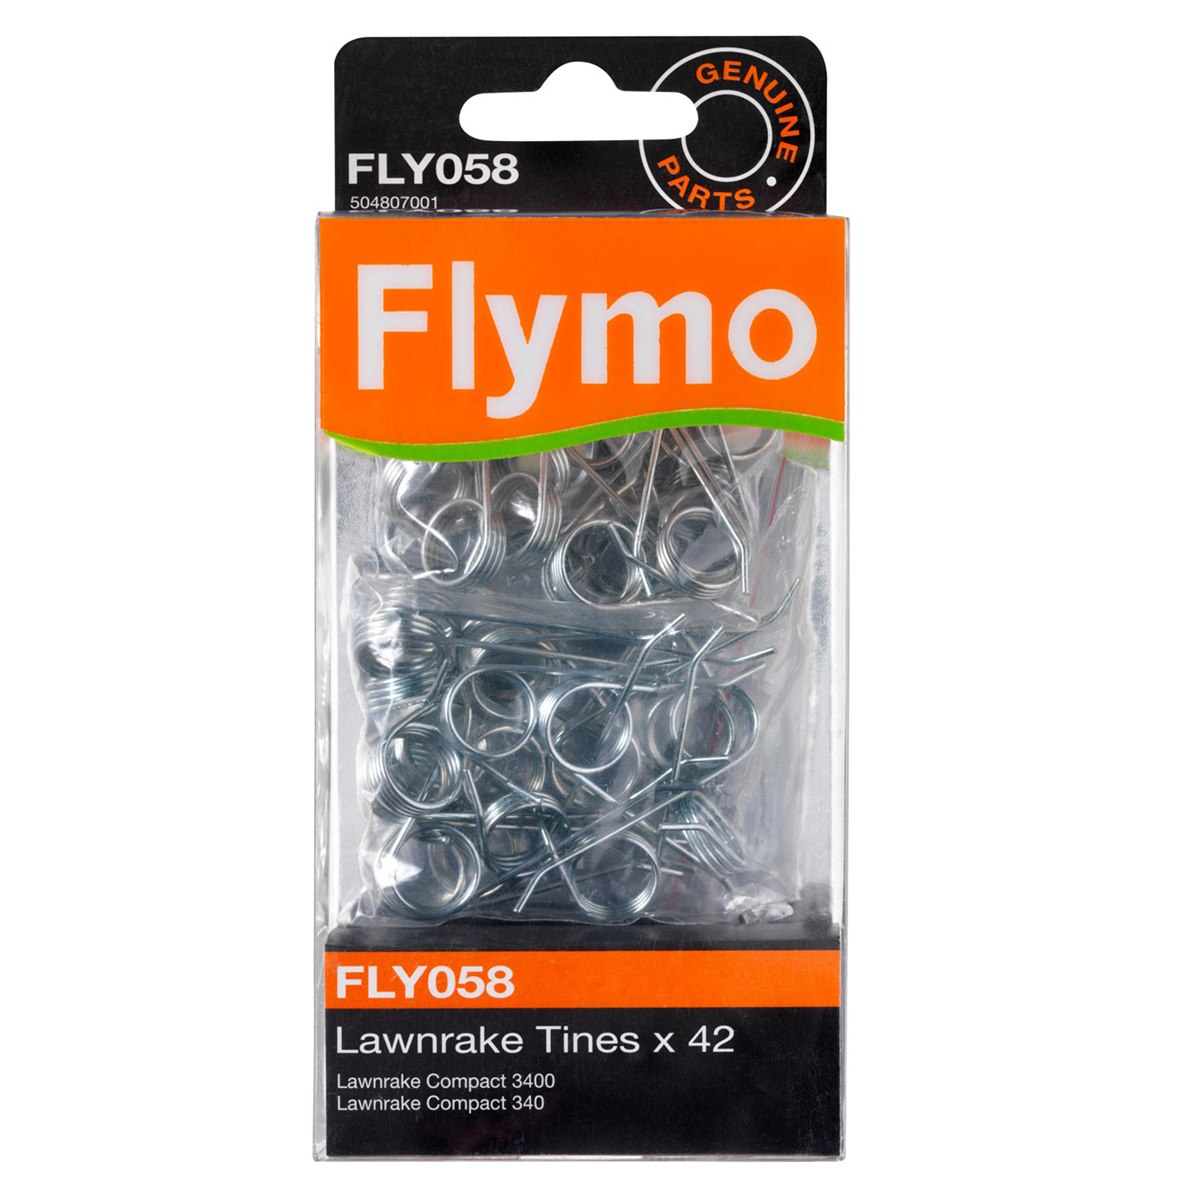 FLY058 Genuine Flymo Lawnrake Replacement Tines Pack of 42